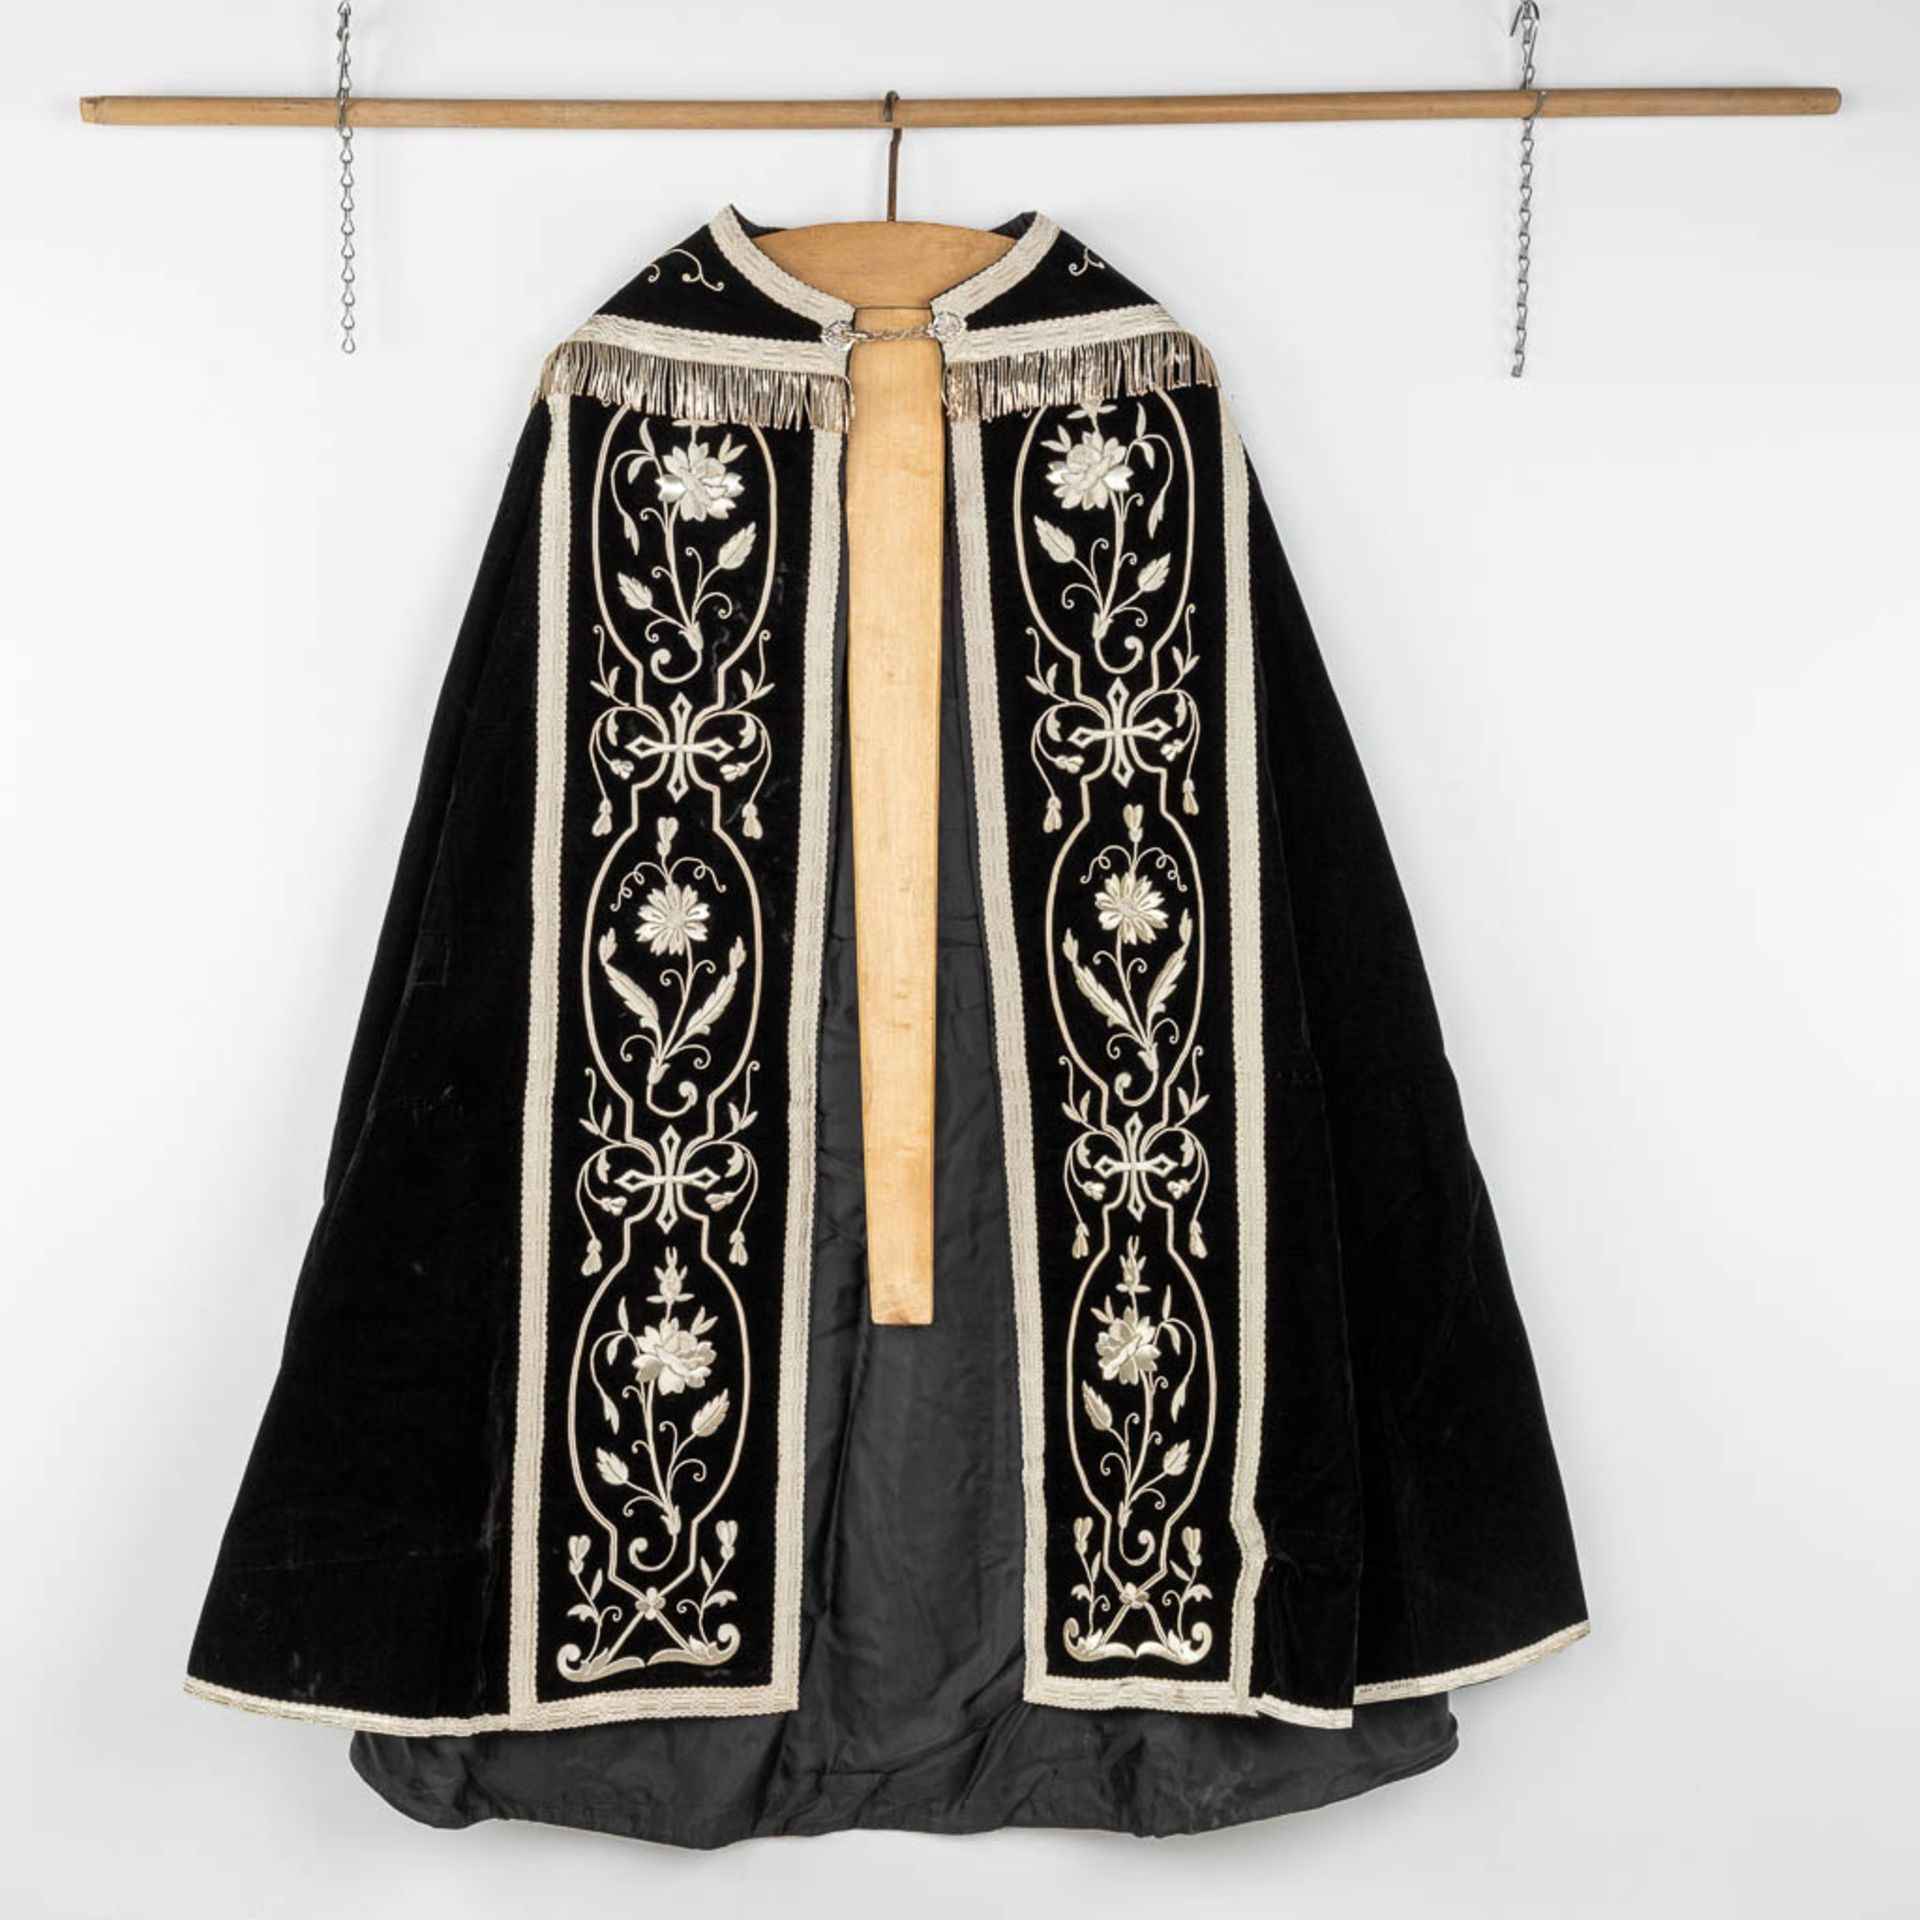 A Cope, Roman Chasuble, Stola, Brusa and Chalice Veil, Decorated with the IHS logo - Image 6 of 14